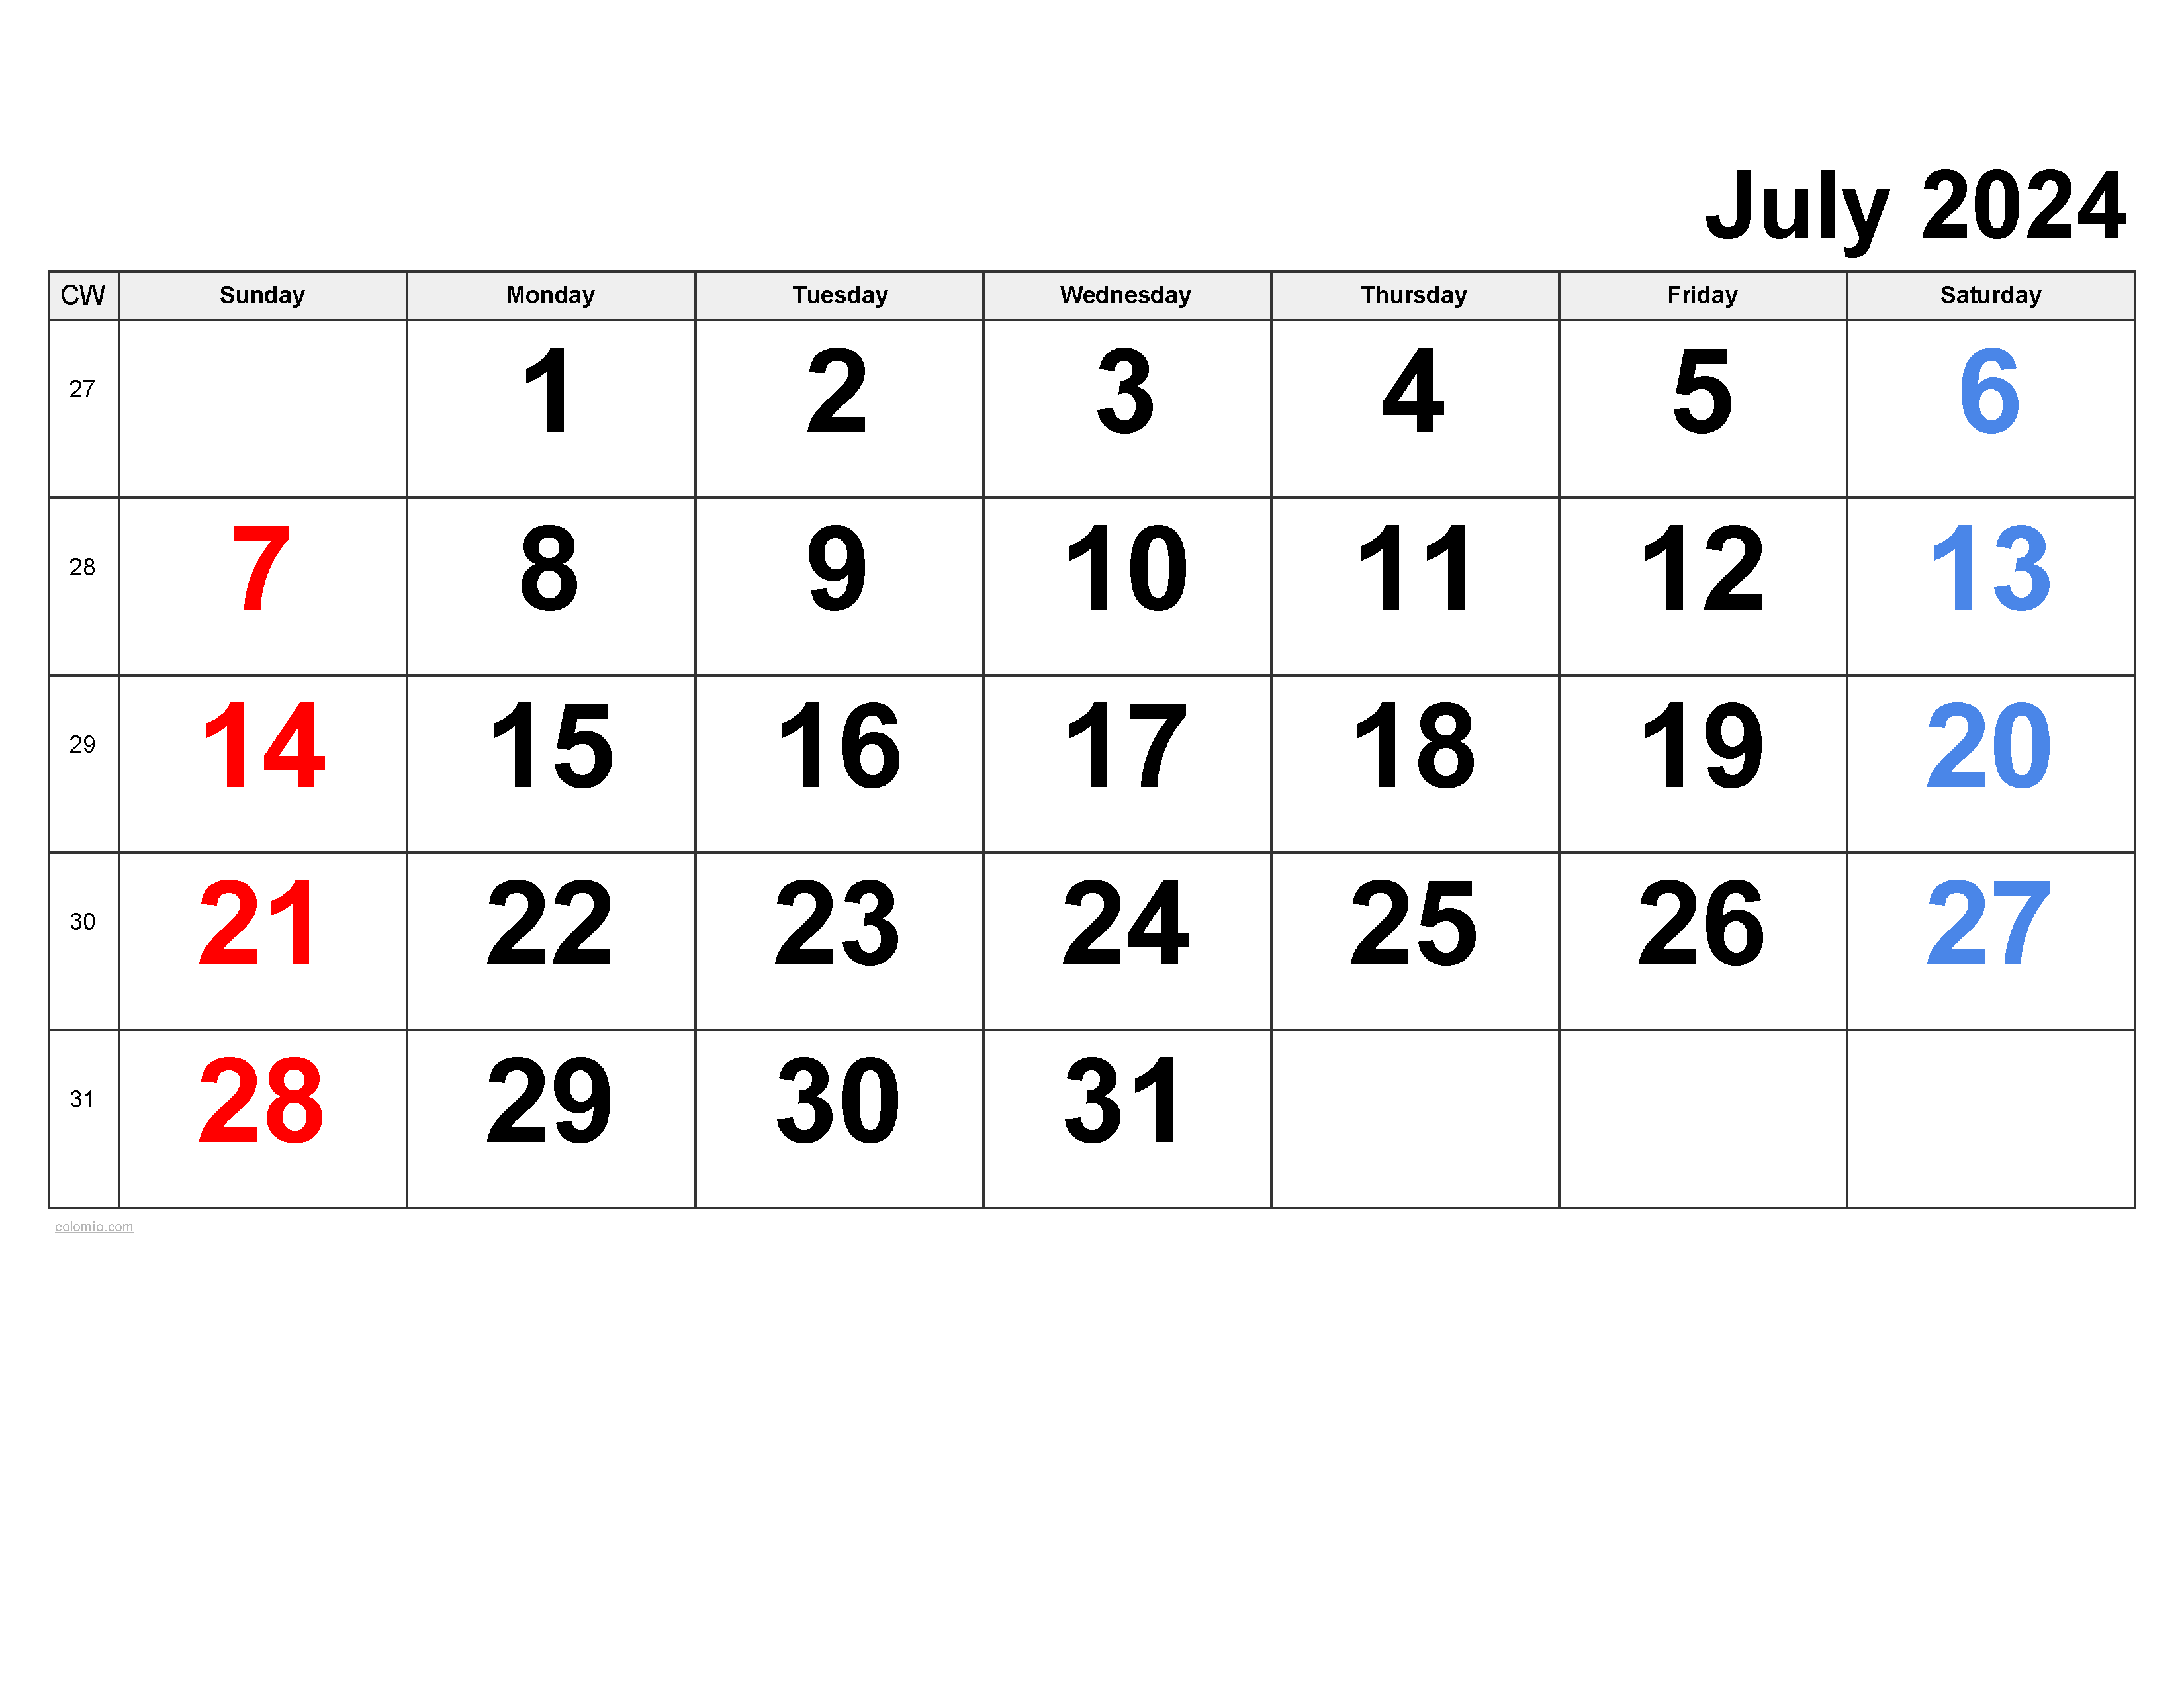 July 2024 Calendar | Free Printable Pdf, Xls And Png with regard to Calendar For 2024 July